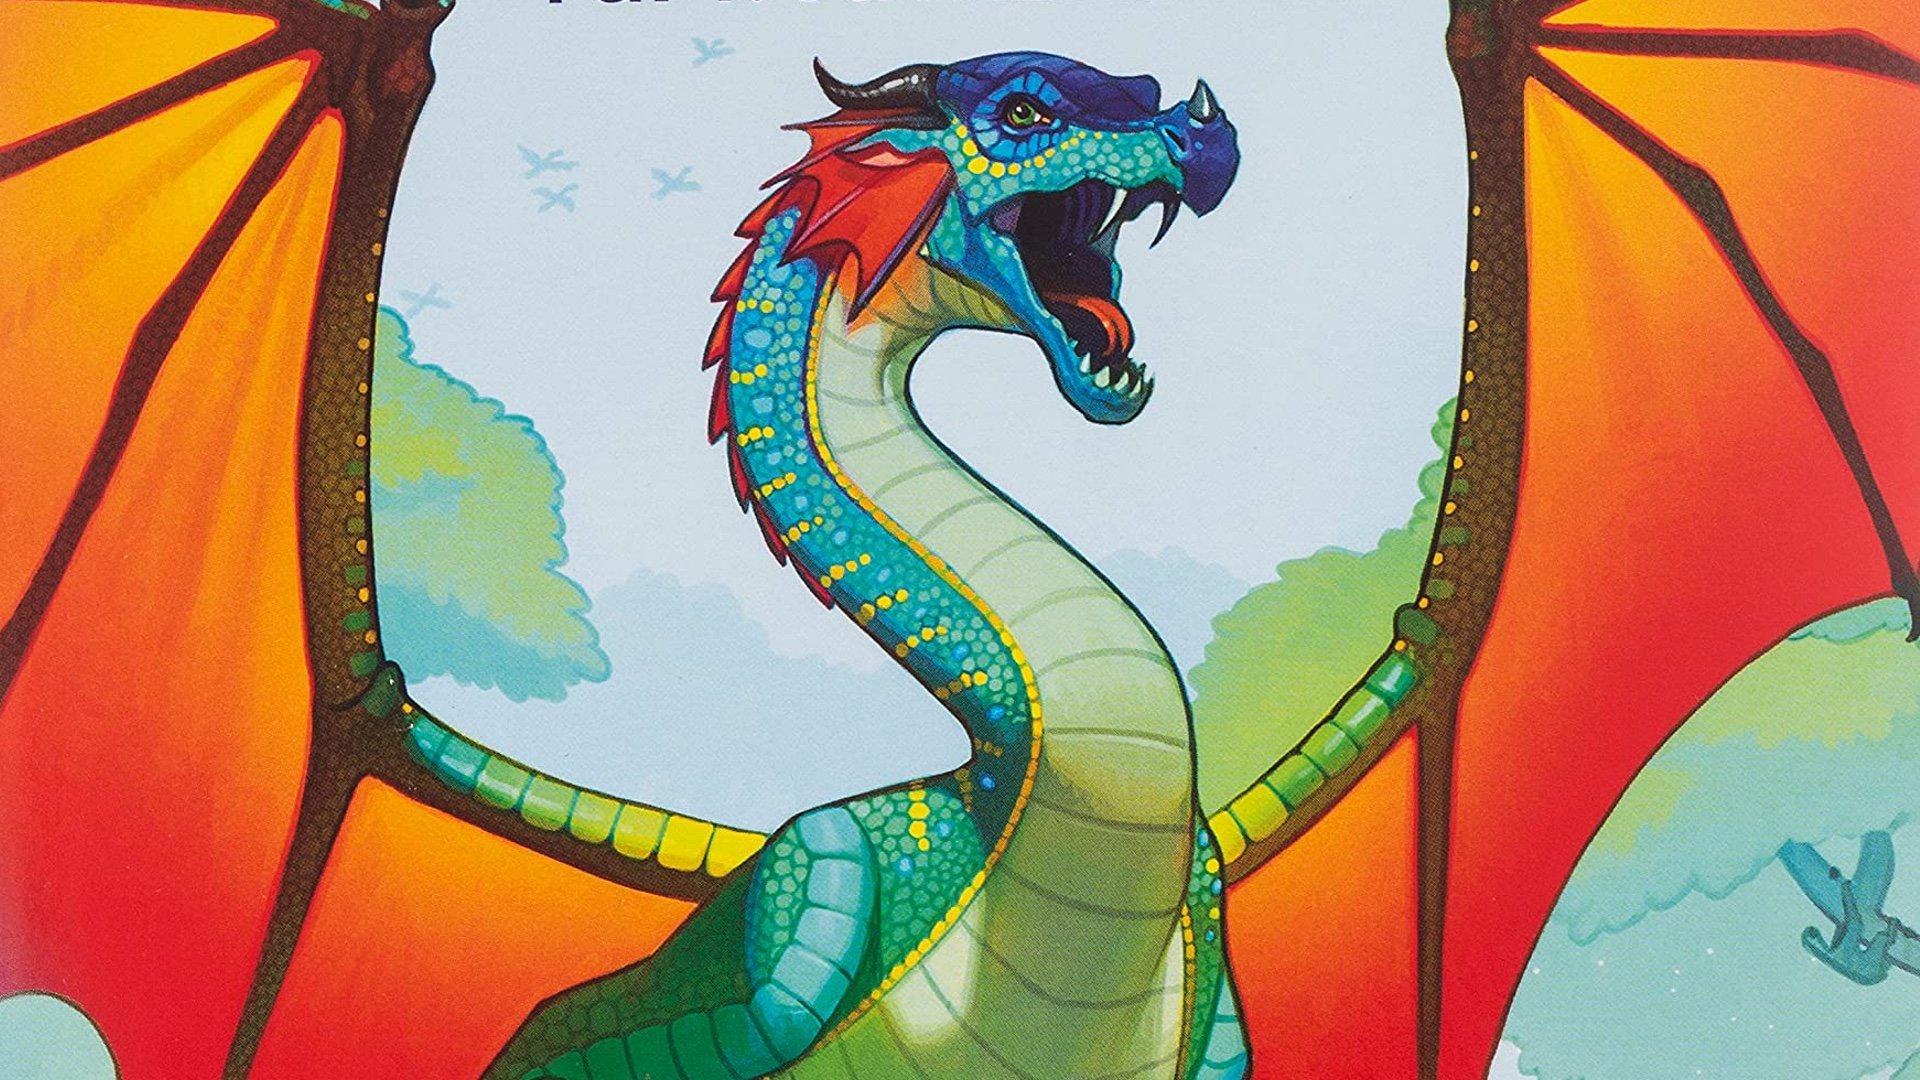 Netflix Cancels Its Animated Adaptation of the WINGS OF FIRE Fantasy Book Series